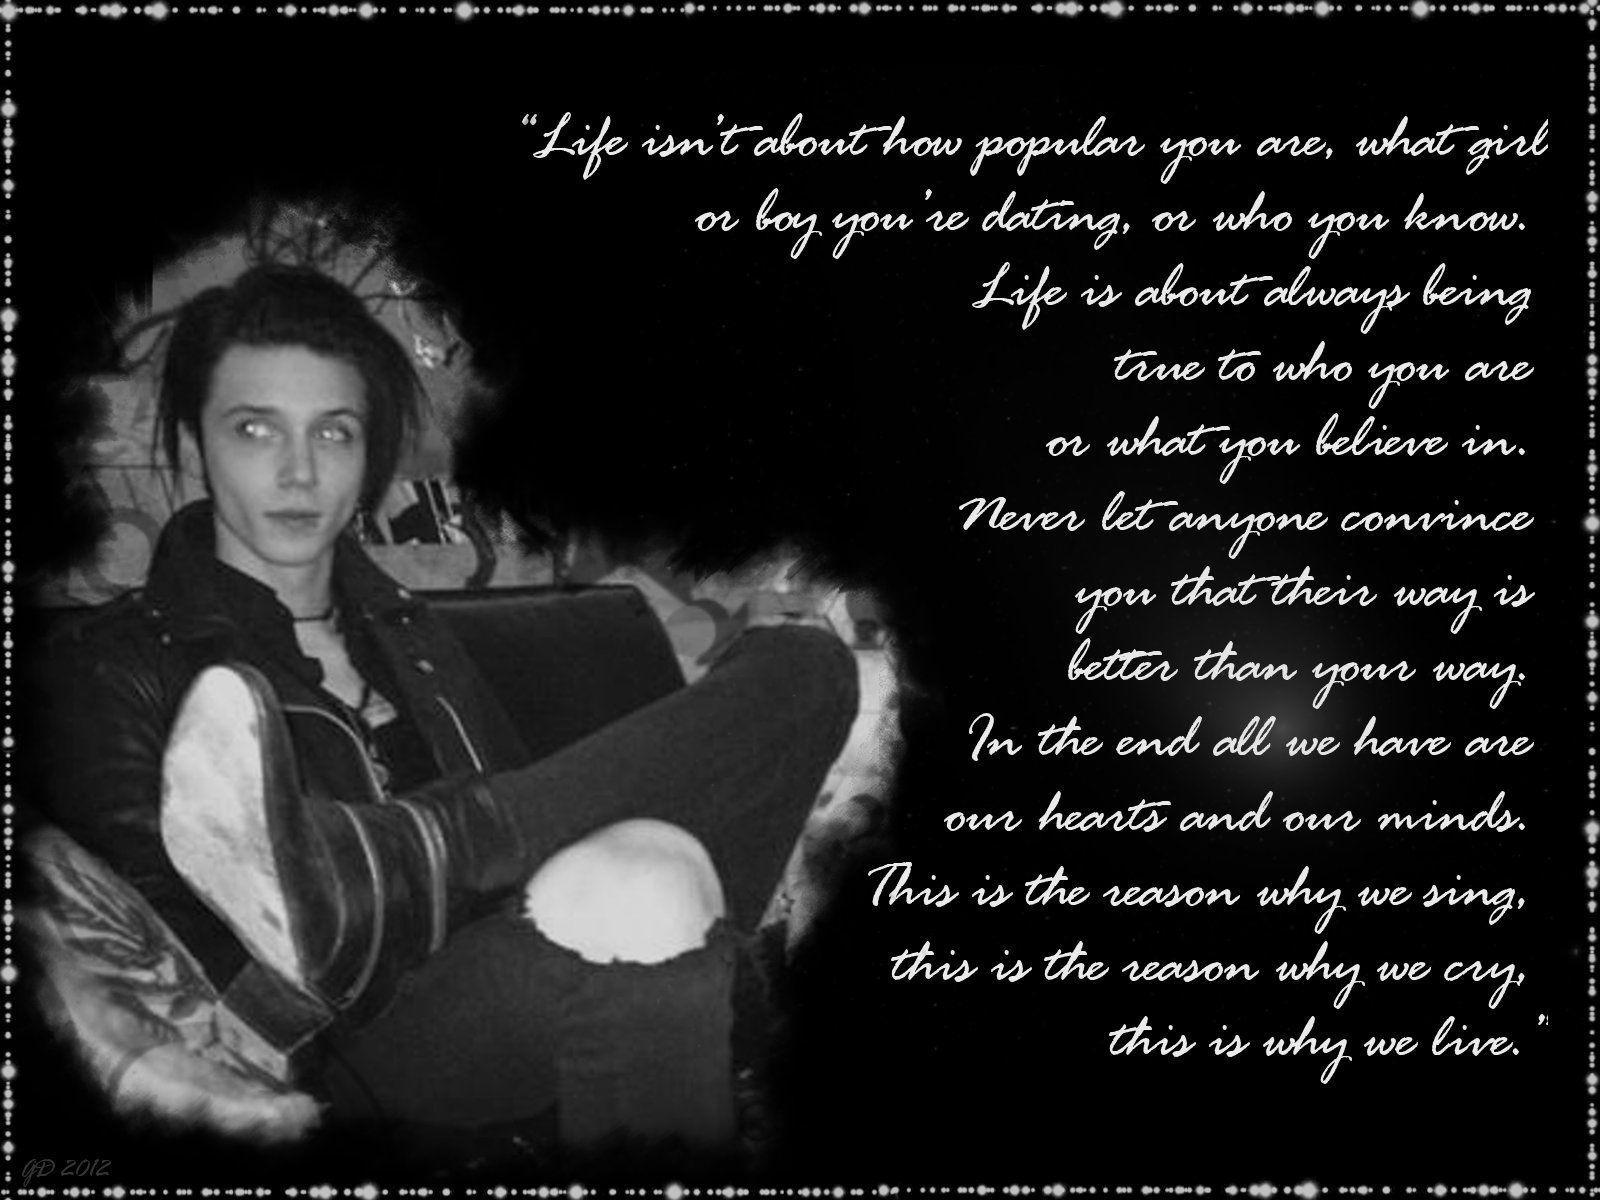 best image about Andy Biersack. Fallen angle, I